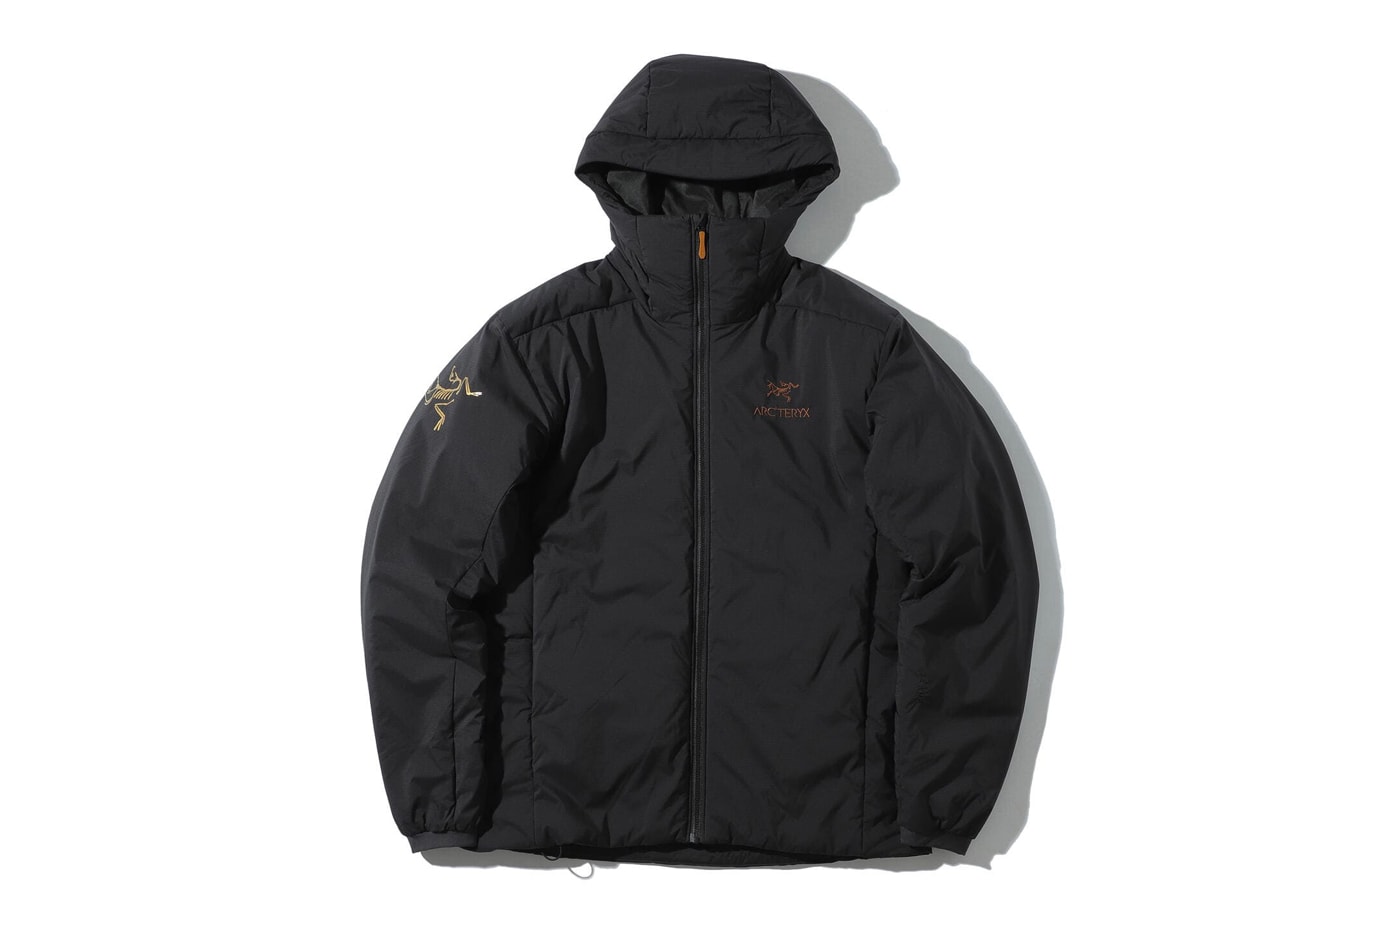 BEAMS arcteryx black and gold capsule Japan Outerwear arc'teryx outerwear jackets bags accessories 